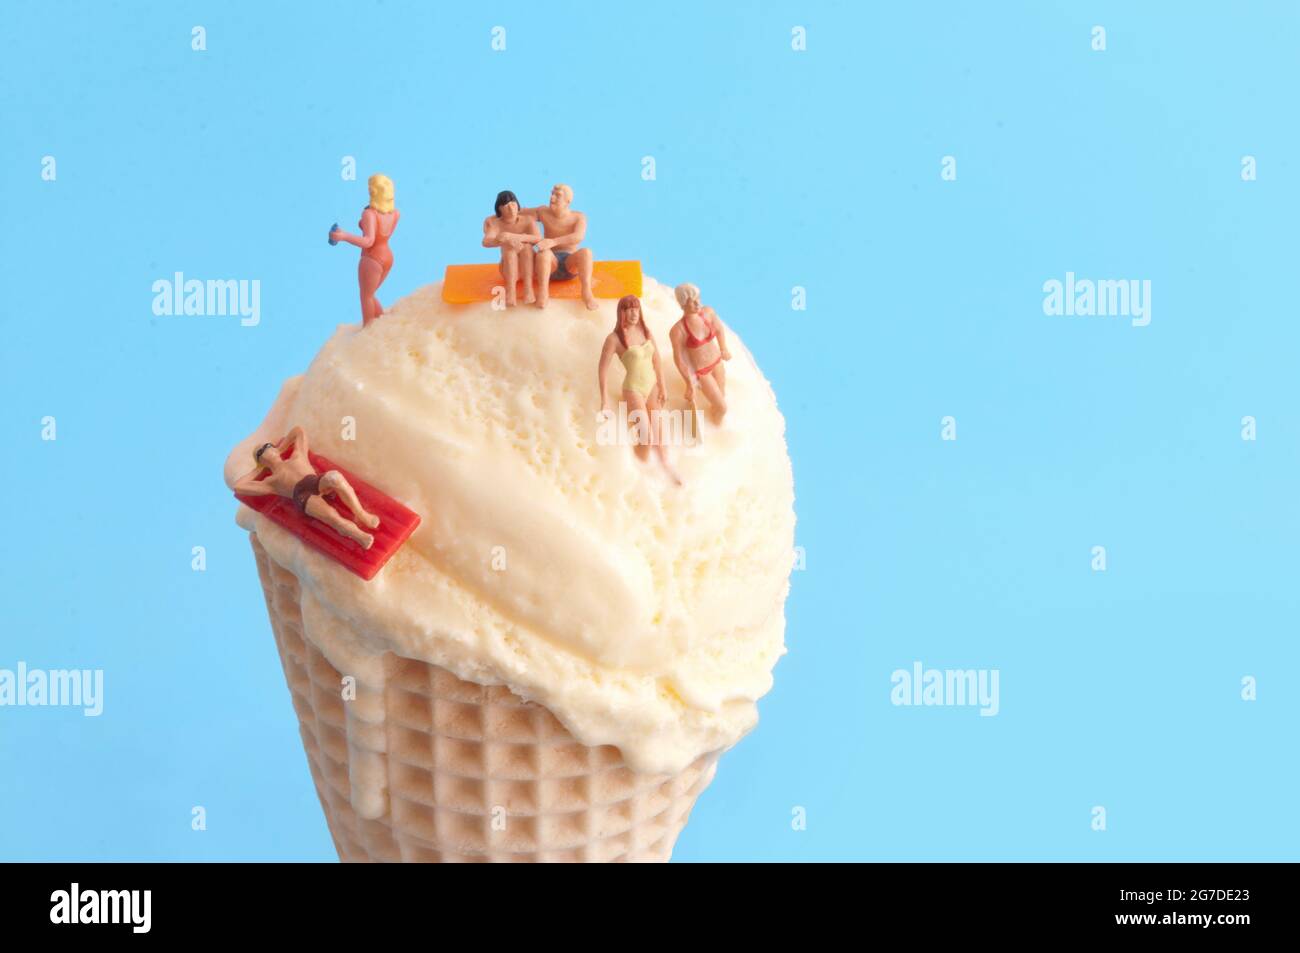 49,300+ Ice Cream Cup Stock Photos, Pictures & Royalty-Free Images - iStock   Soft serve ice cream cup, Vanilla ice cream cup, Hand holding ice cream  cup